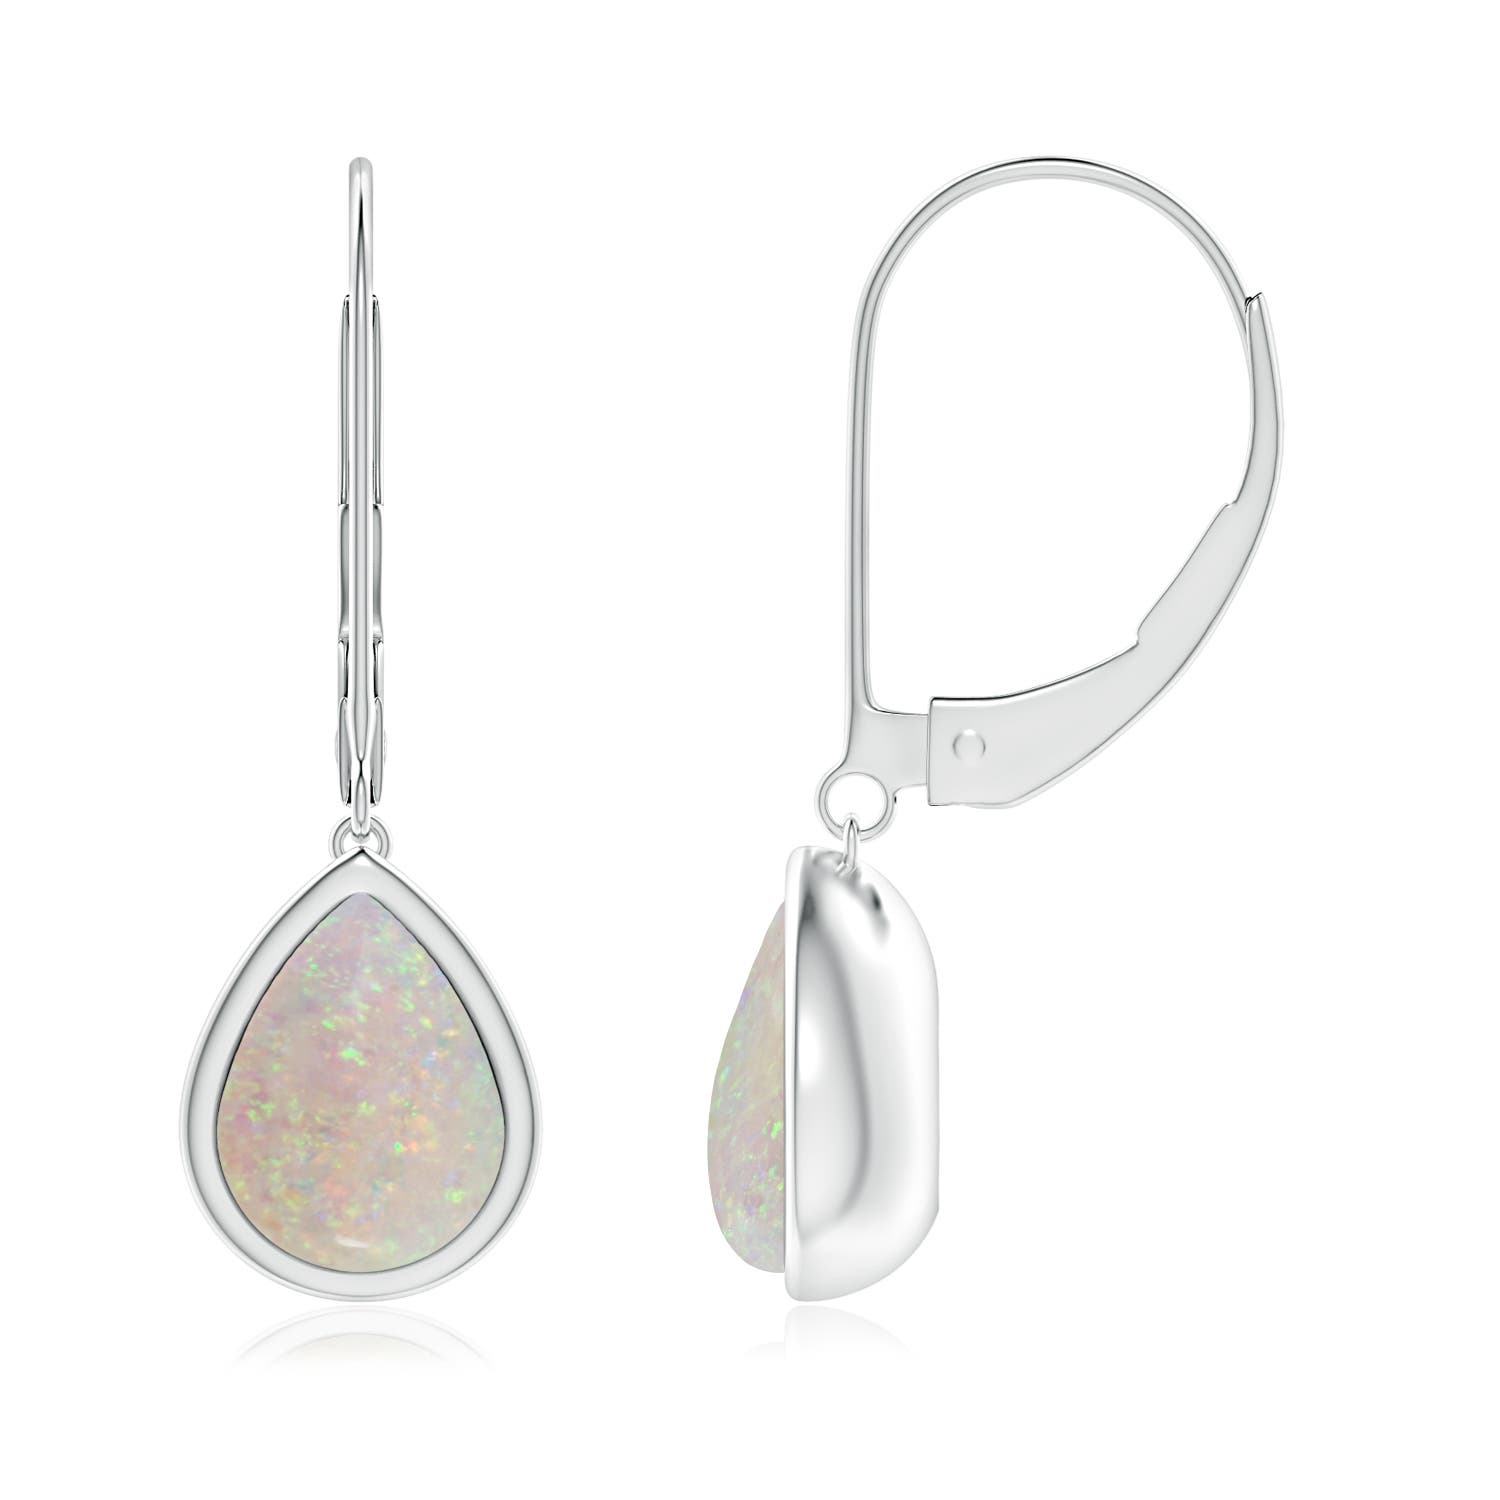 AA - Opal / 1.4 CT / 14 KT White Gold